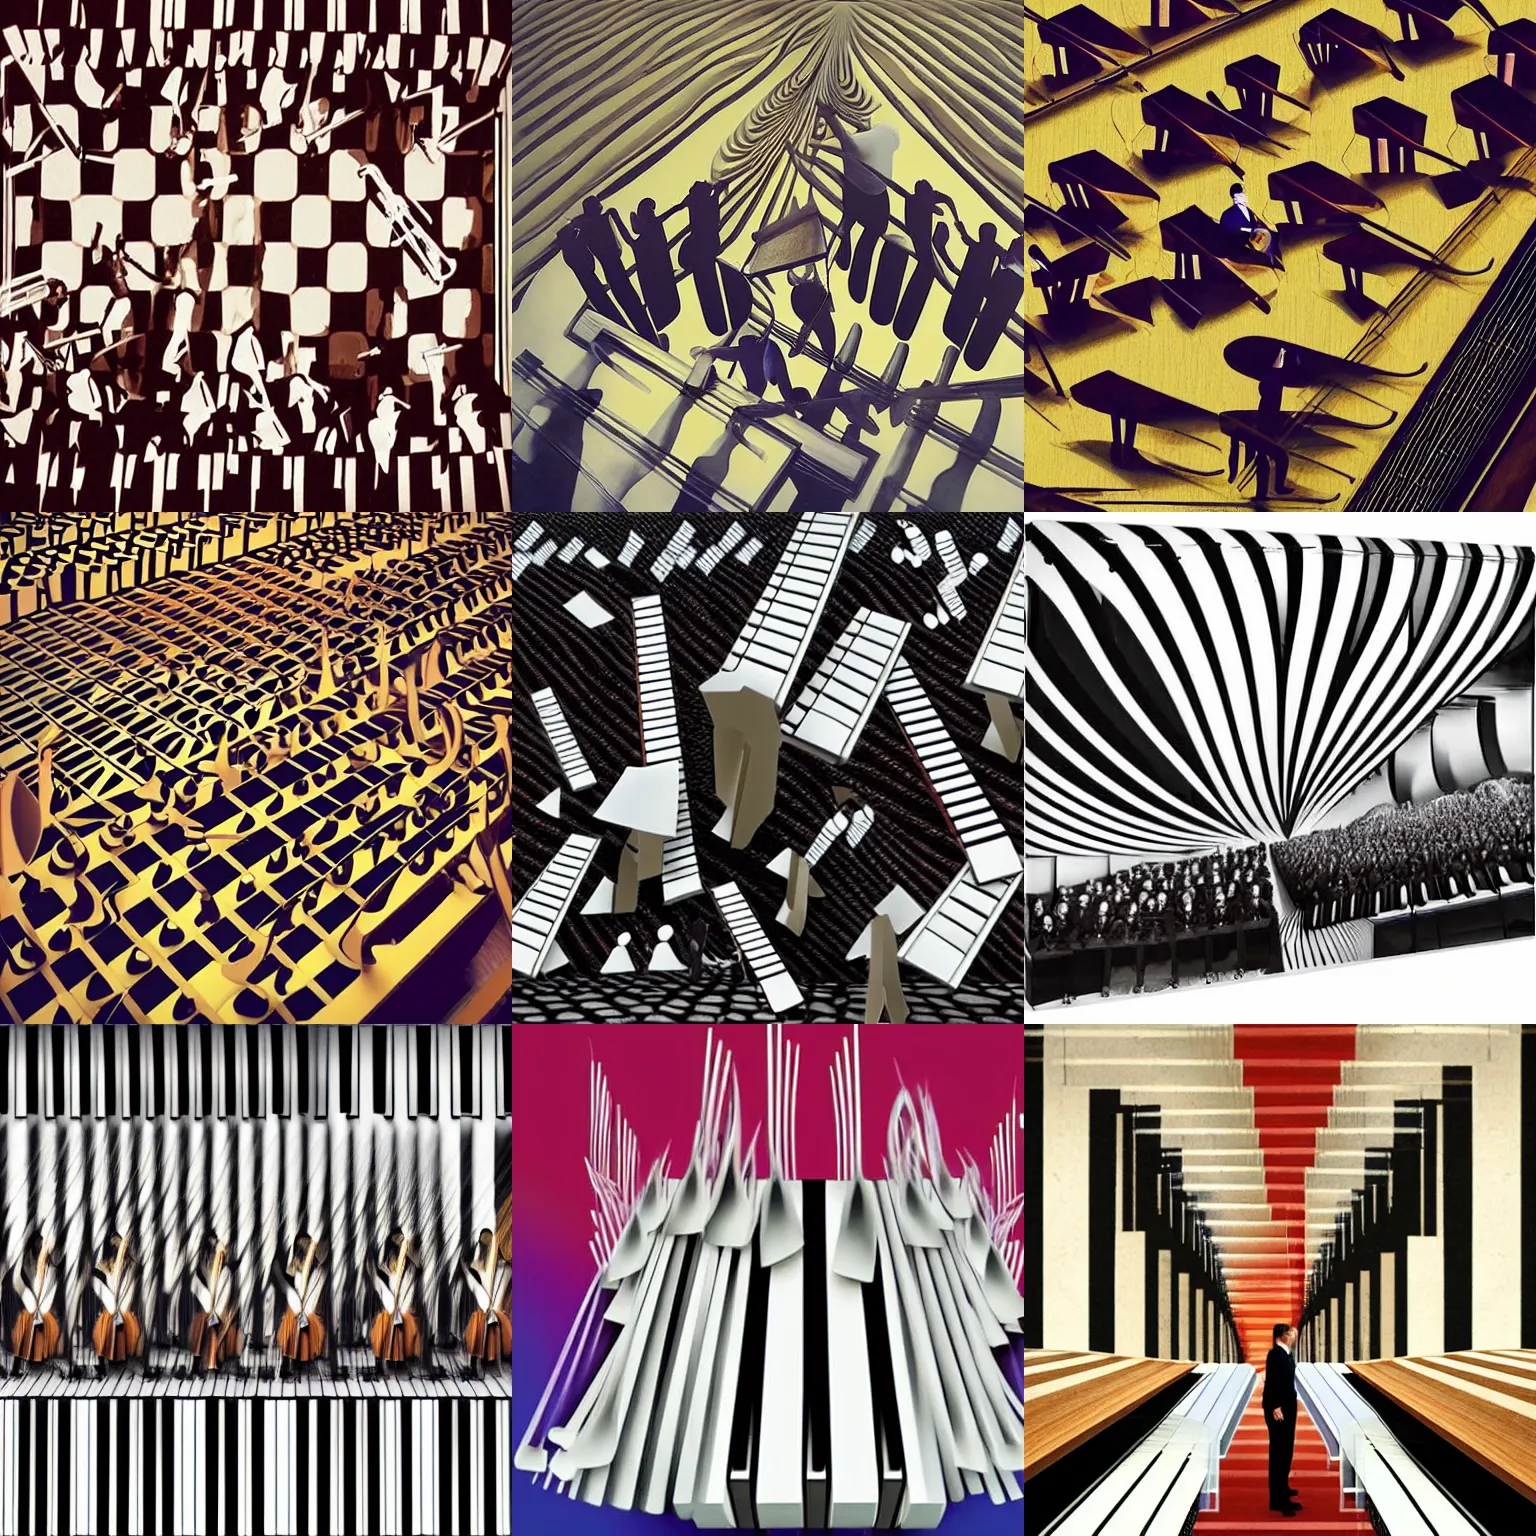 Prompt: members of an orchestra standing on floating piano keys, geometric patterns, surrealism